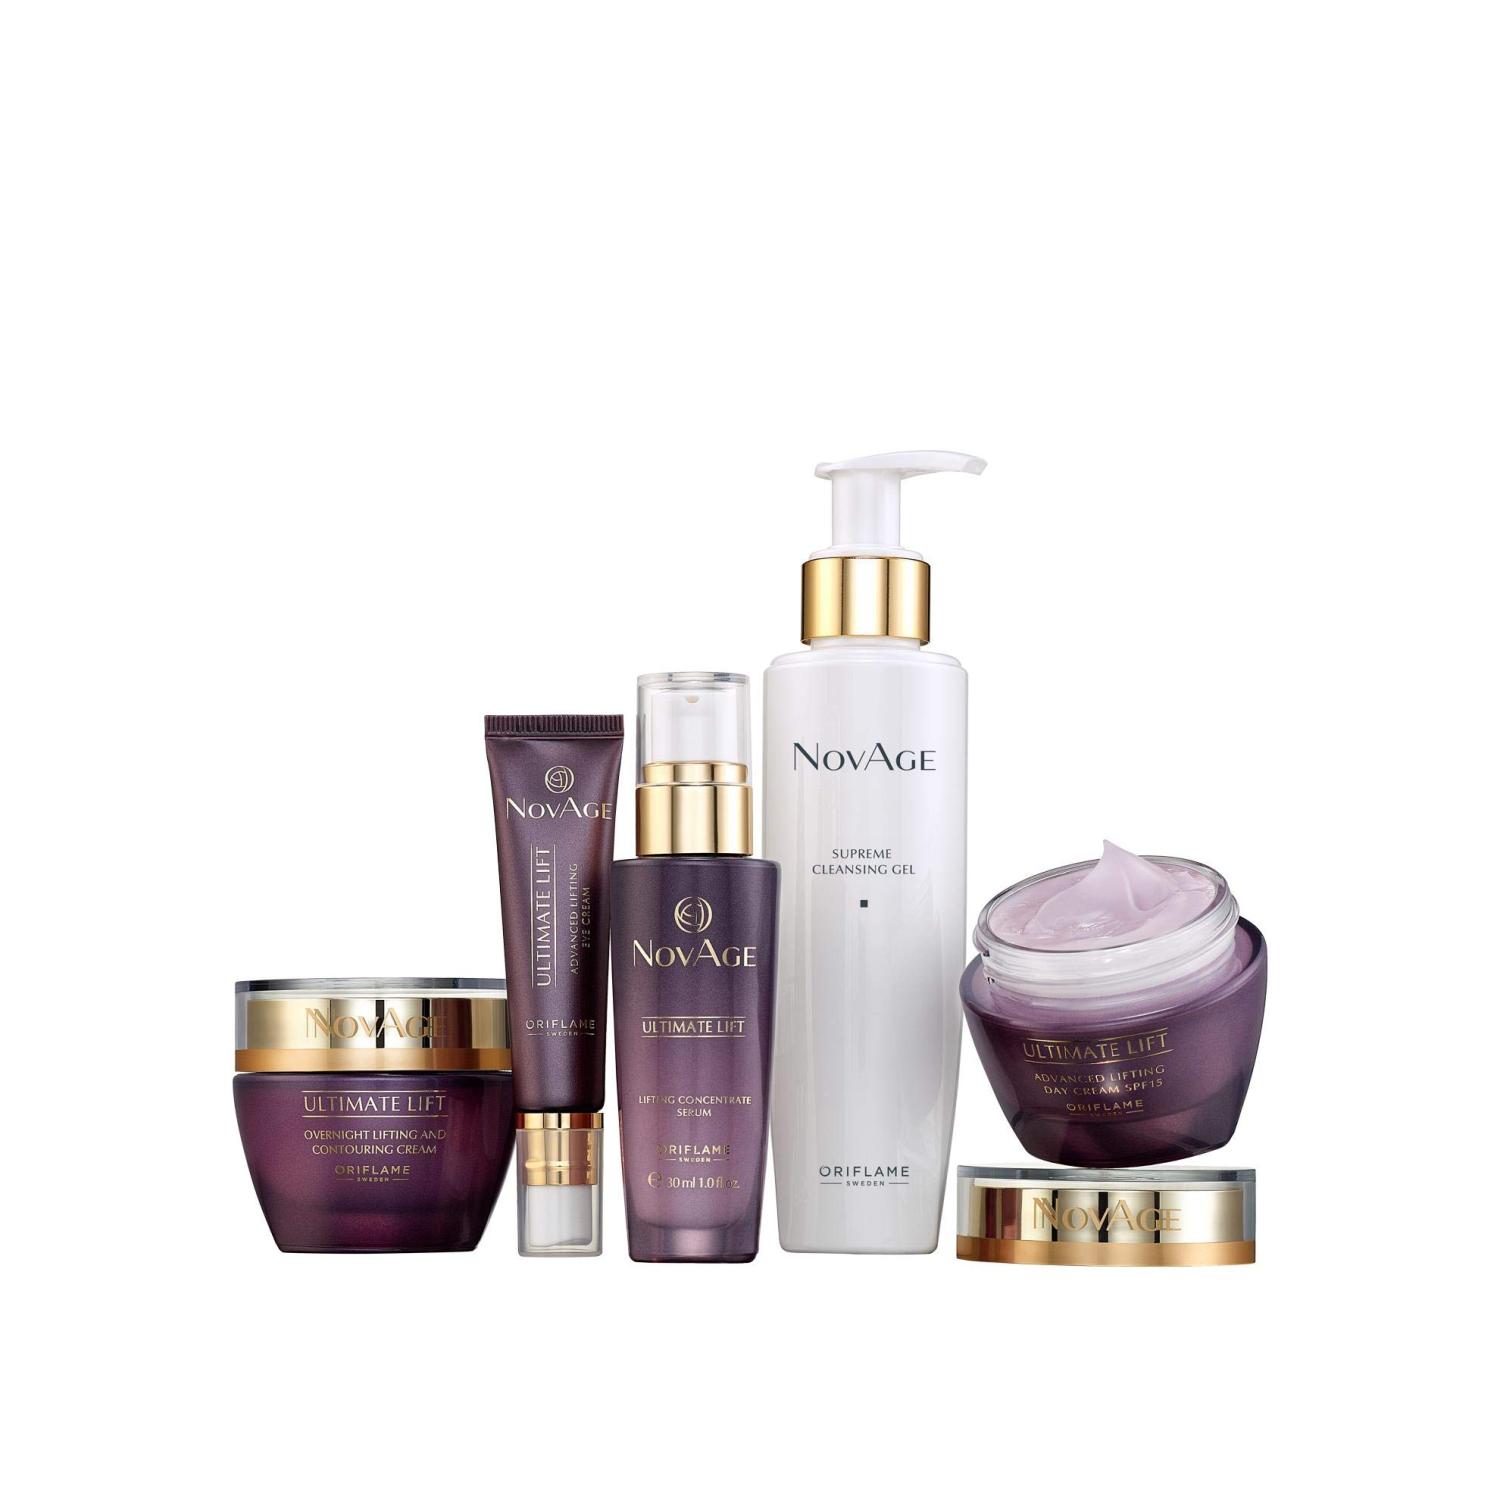 NovAge Ultimate Lift Skin Care Set advanced-performing routine to restore  firmness and elasticity for a lifted look with a delightfully youthful  bounce